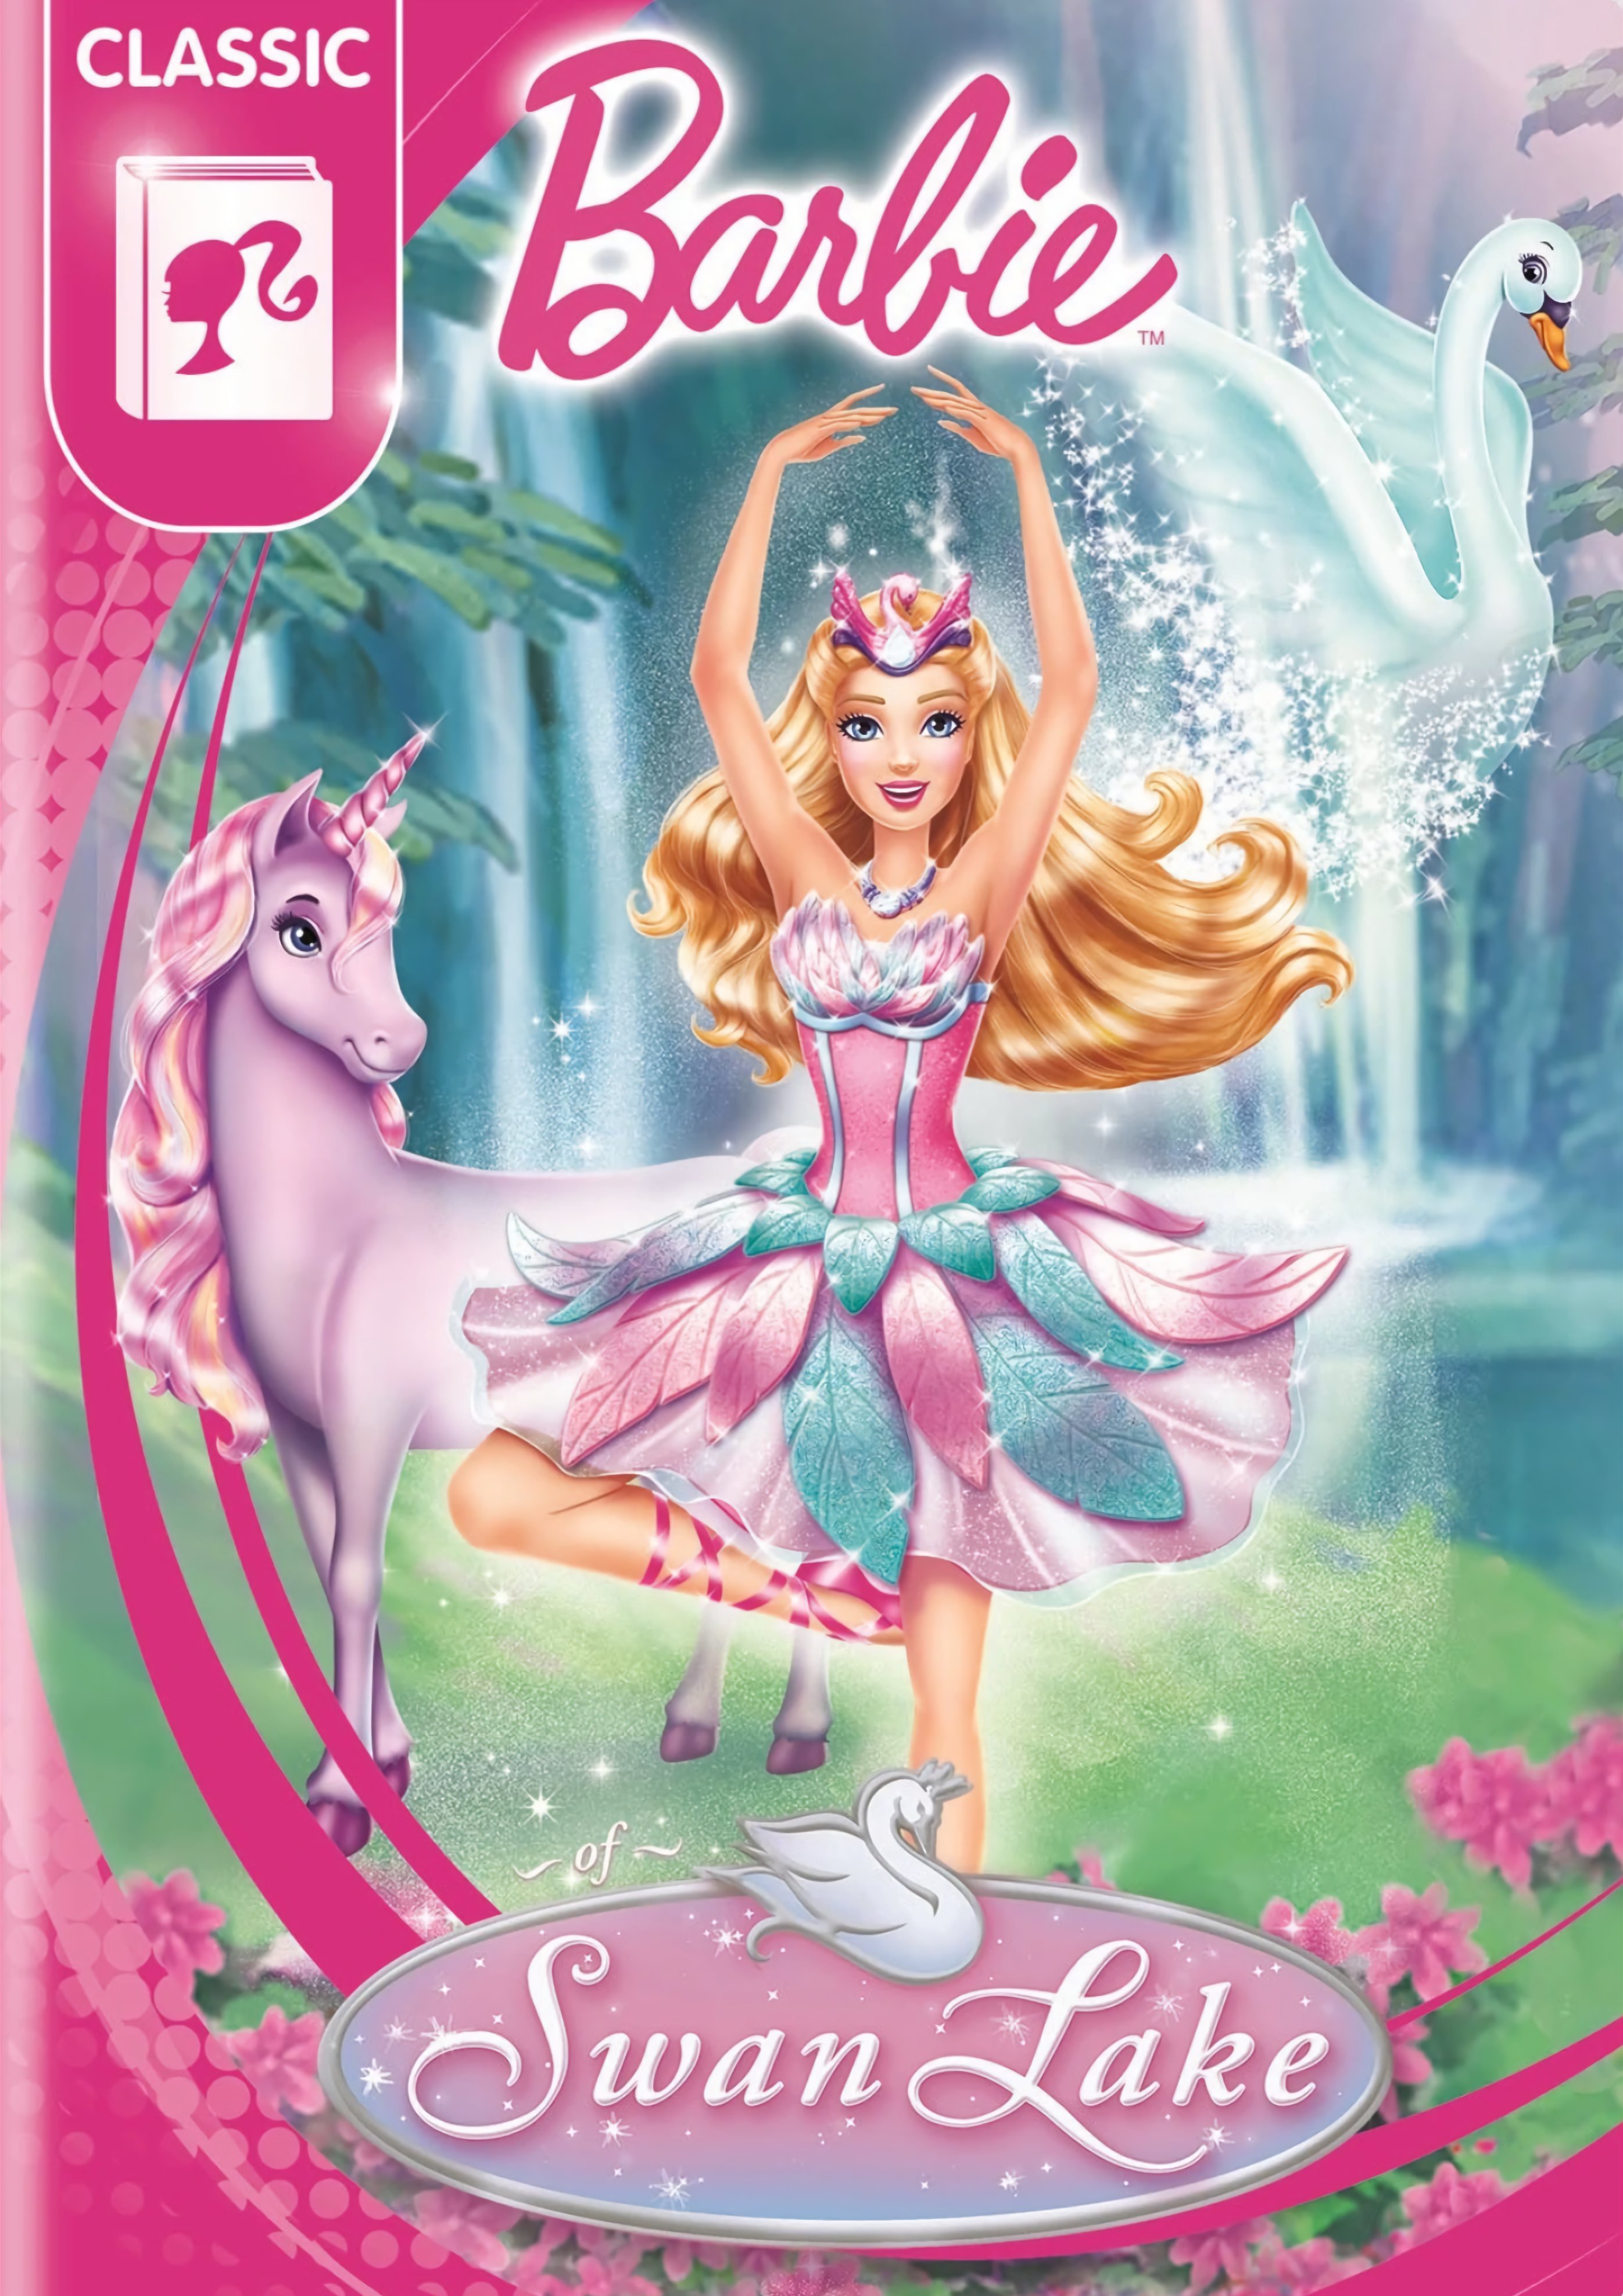 cuteyoongipie Barbie Movies In Order Full HD #movies #posters #HD #Wallpaper #cover #classic #art #shows 12. Barbie Fairytopia: Magic of the Rainbow (2007)